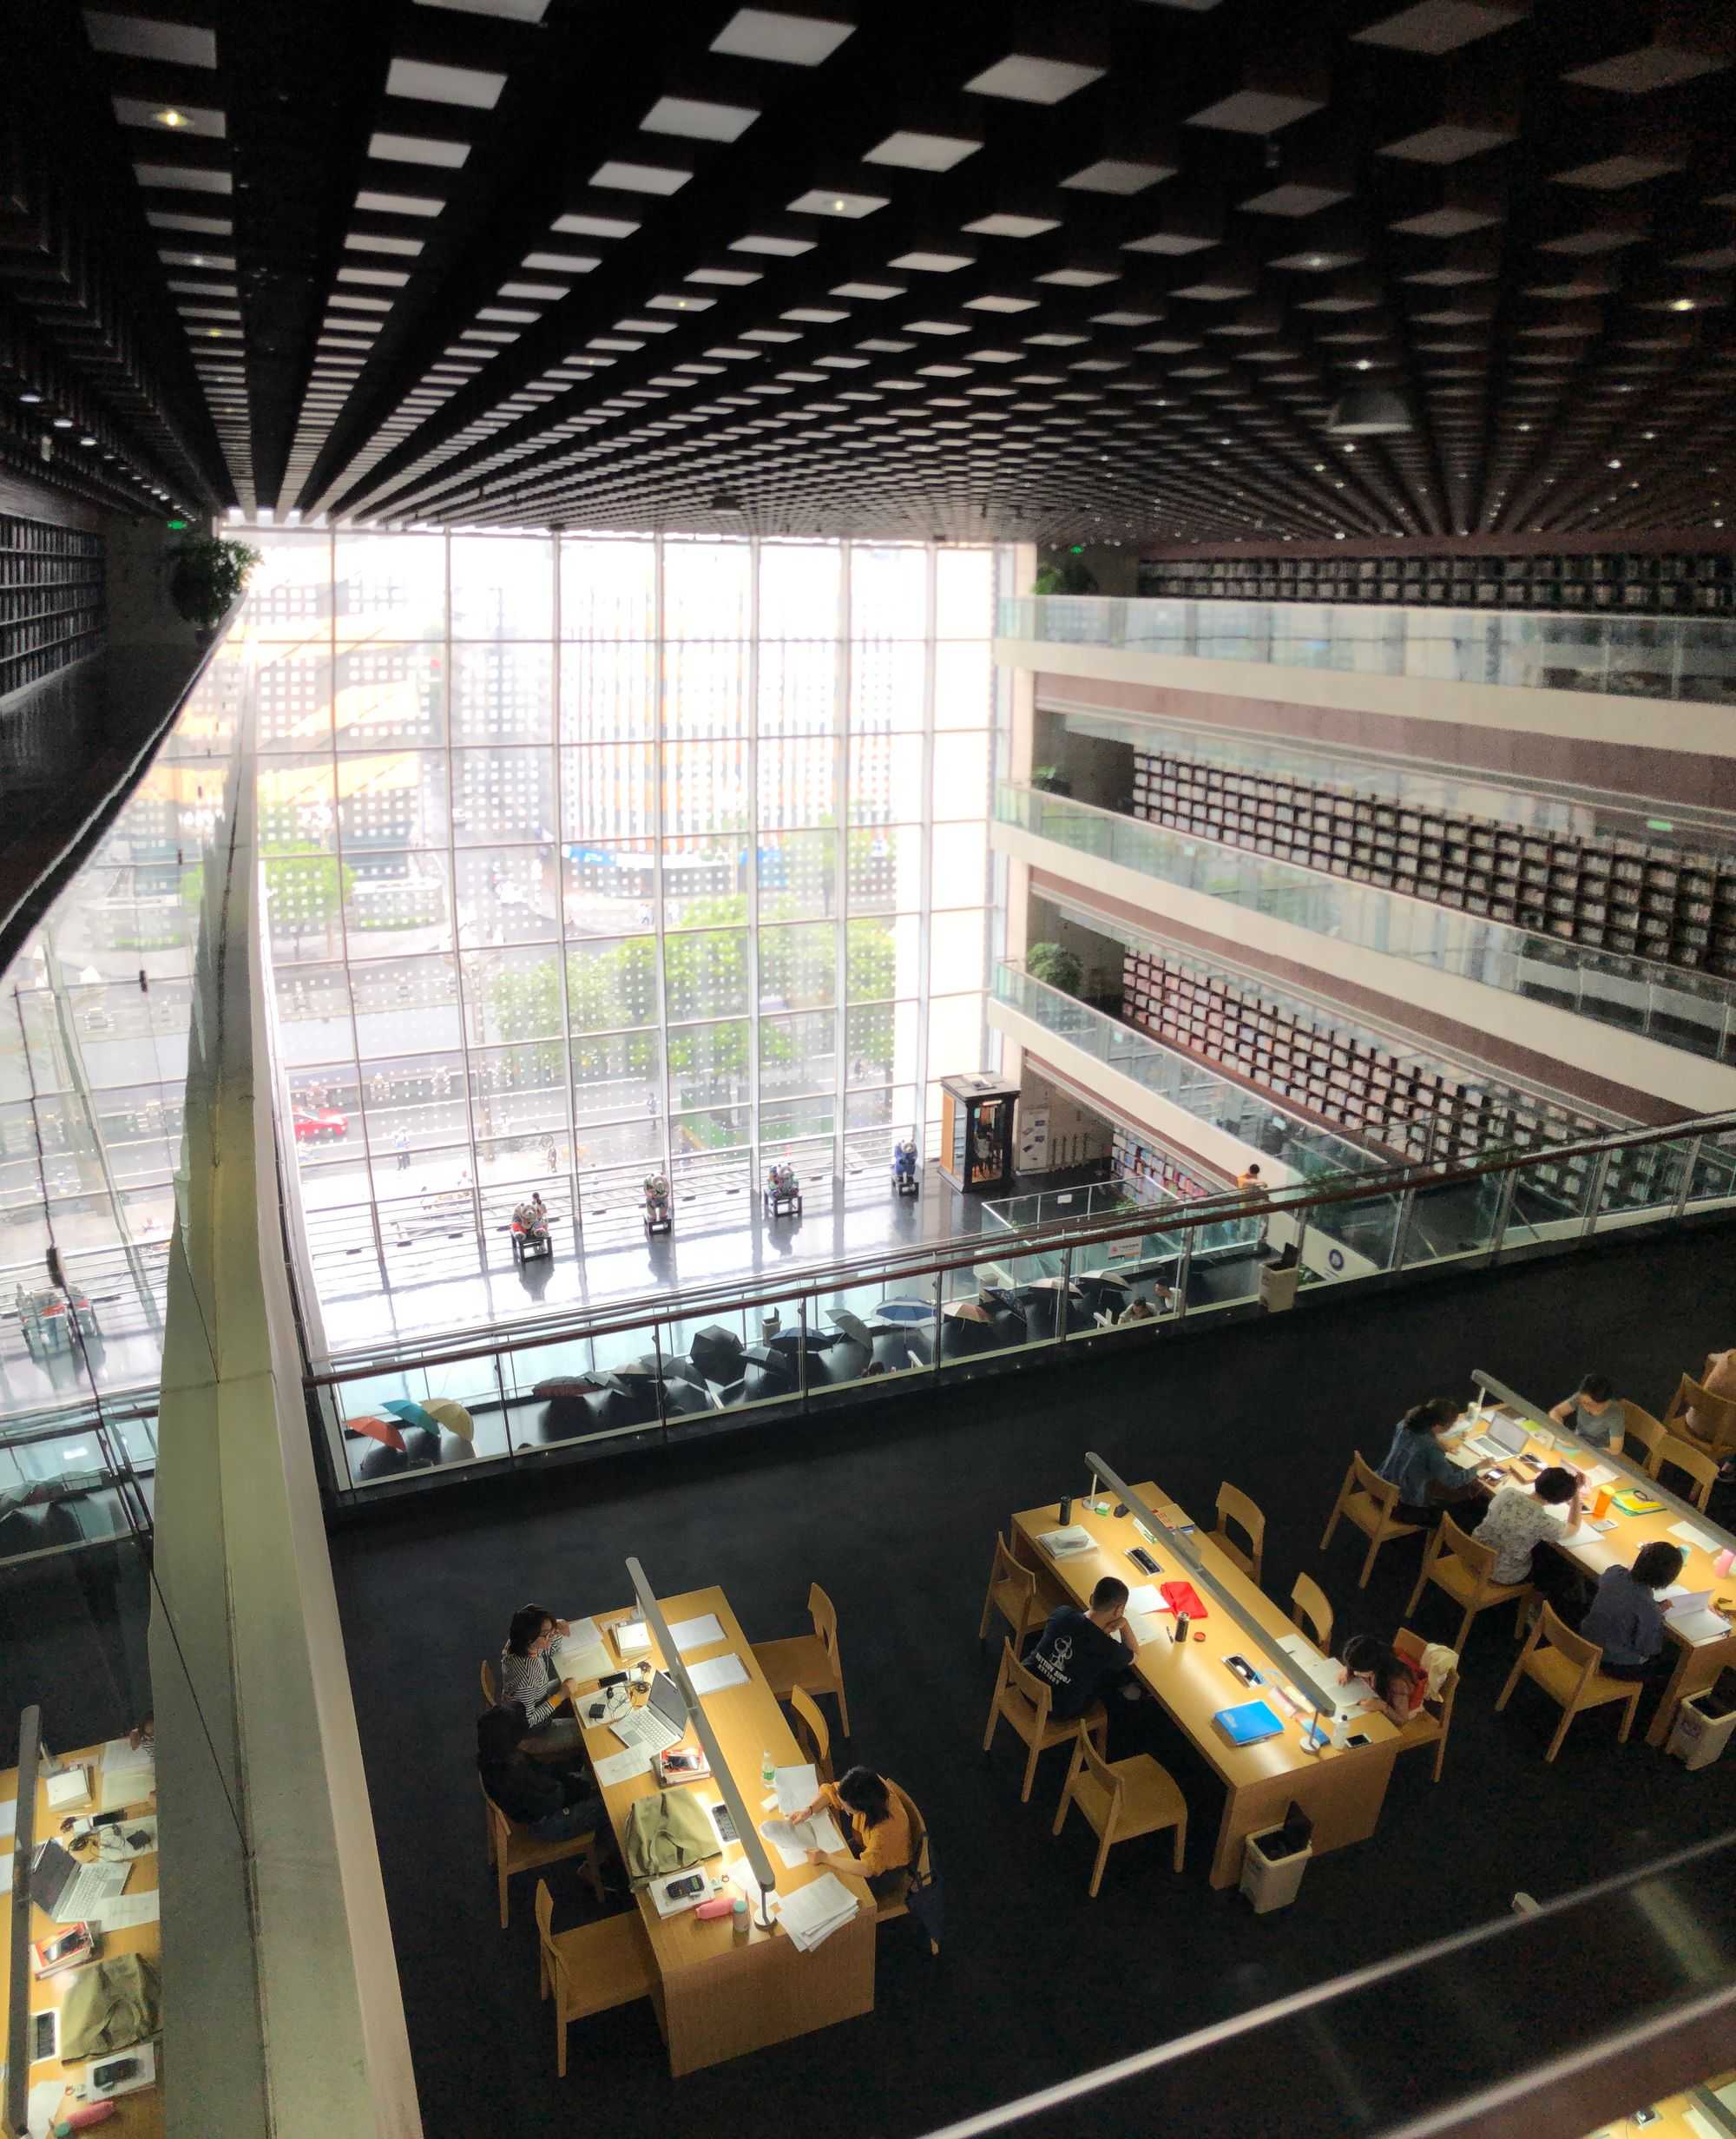 Sichuan Provincial Library (四川省图书馆) (Image by author)